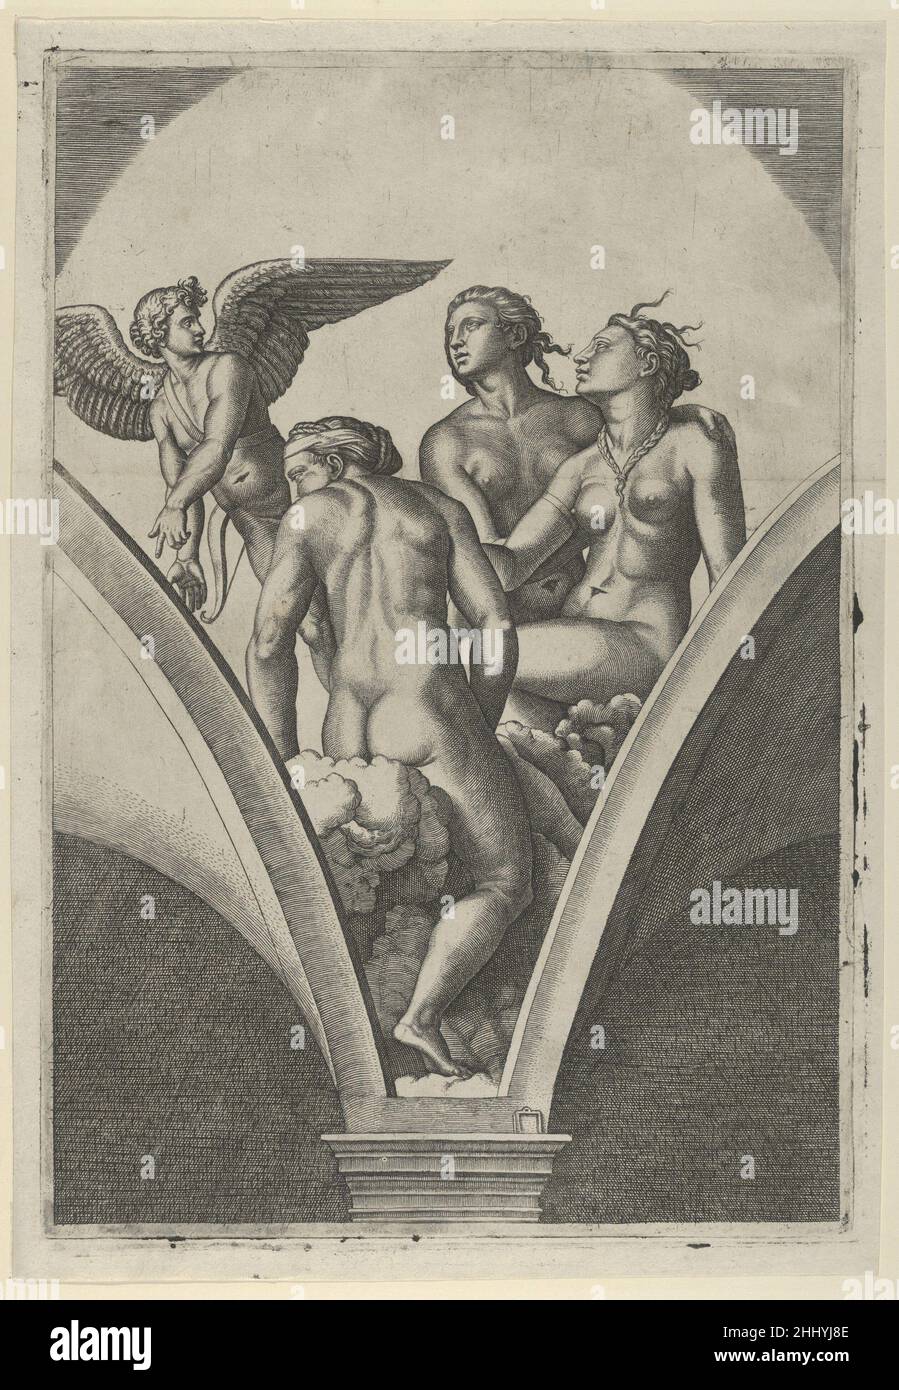 The Three Graces sitting on clouds, cupid at the left, after Raphael's fresco in the Chigi Gallery of the Villa Farnesina in Rome ca. 1517–20 Marcantonio Raimondi Italian. The Three Graces sitting on clouds, cupid at the left, after Raphael's fresco in the Chigi Gallery of the Villa Farnesina in Rome  342583 Stock Photo